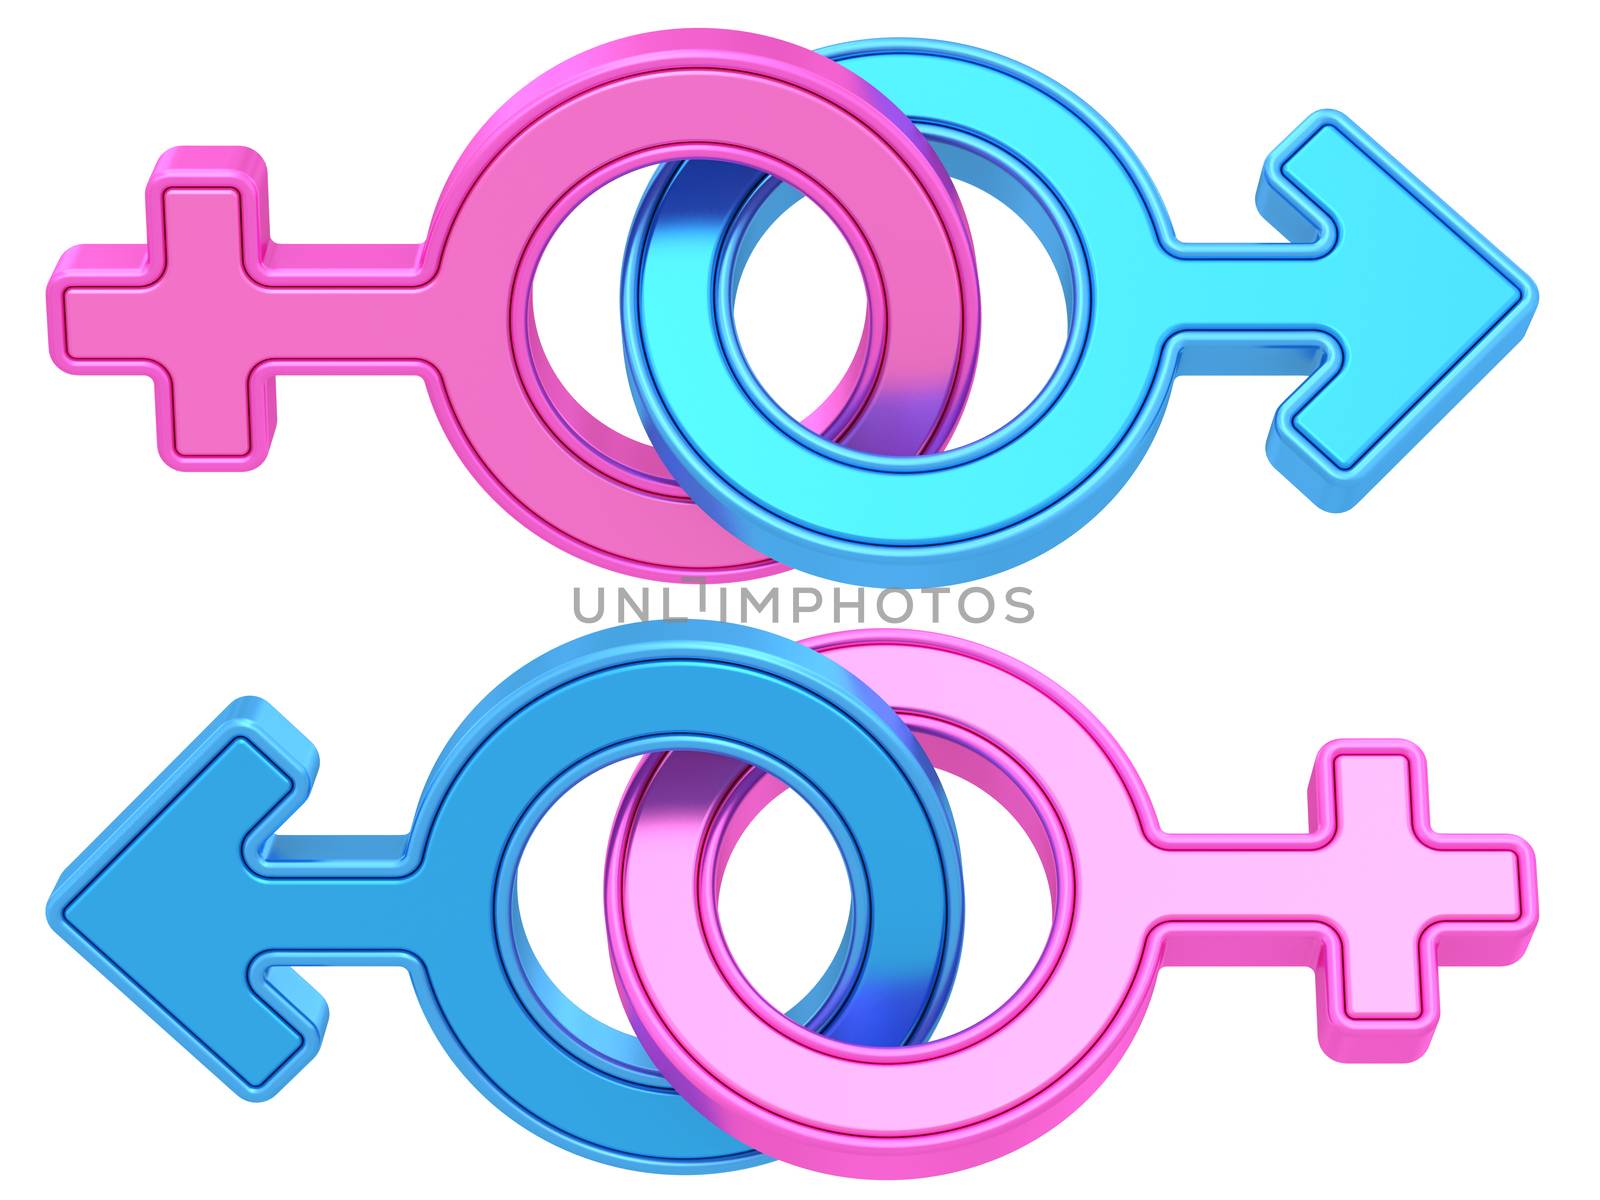 Set of male and female gender symbols chained together on white background. High resolution 3D image